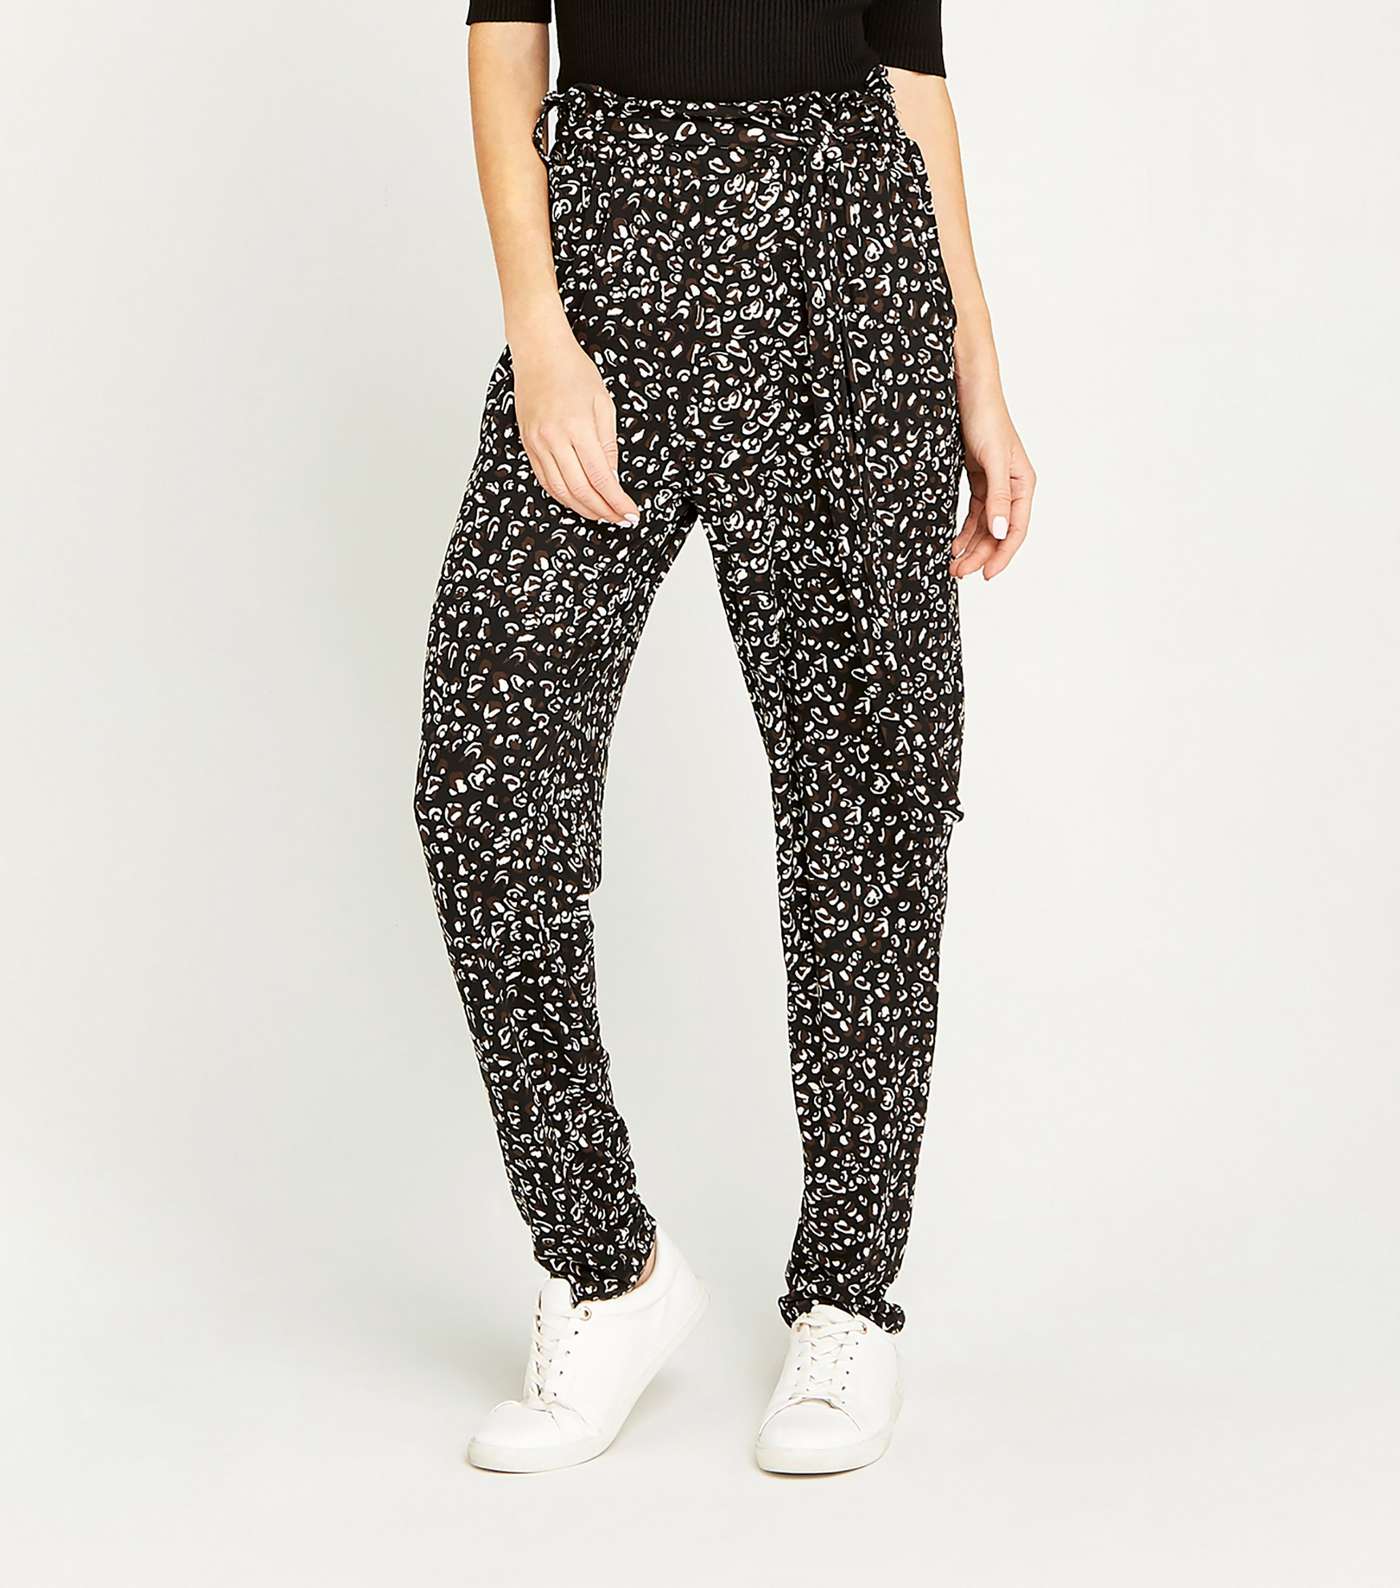 Apricot Brown Leopard Print Soft Touch Trousers